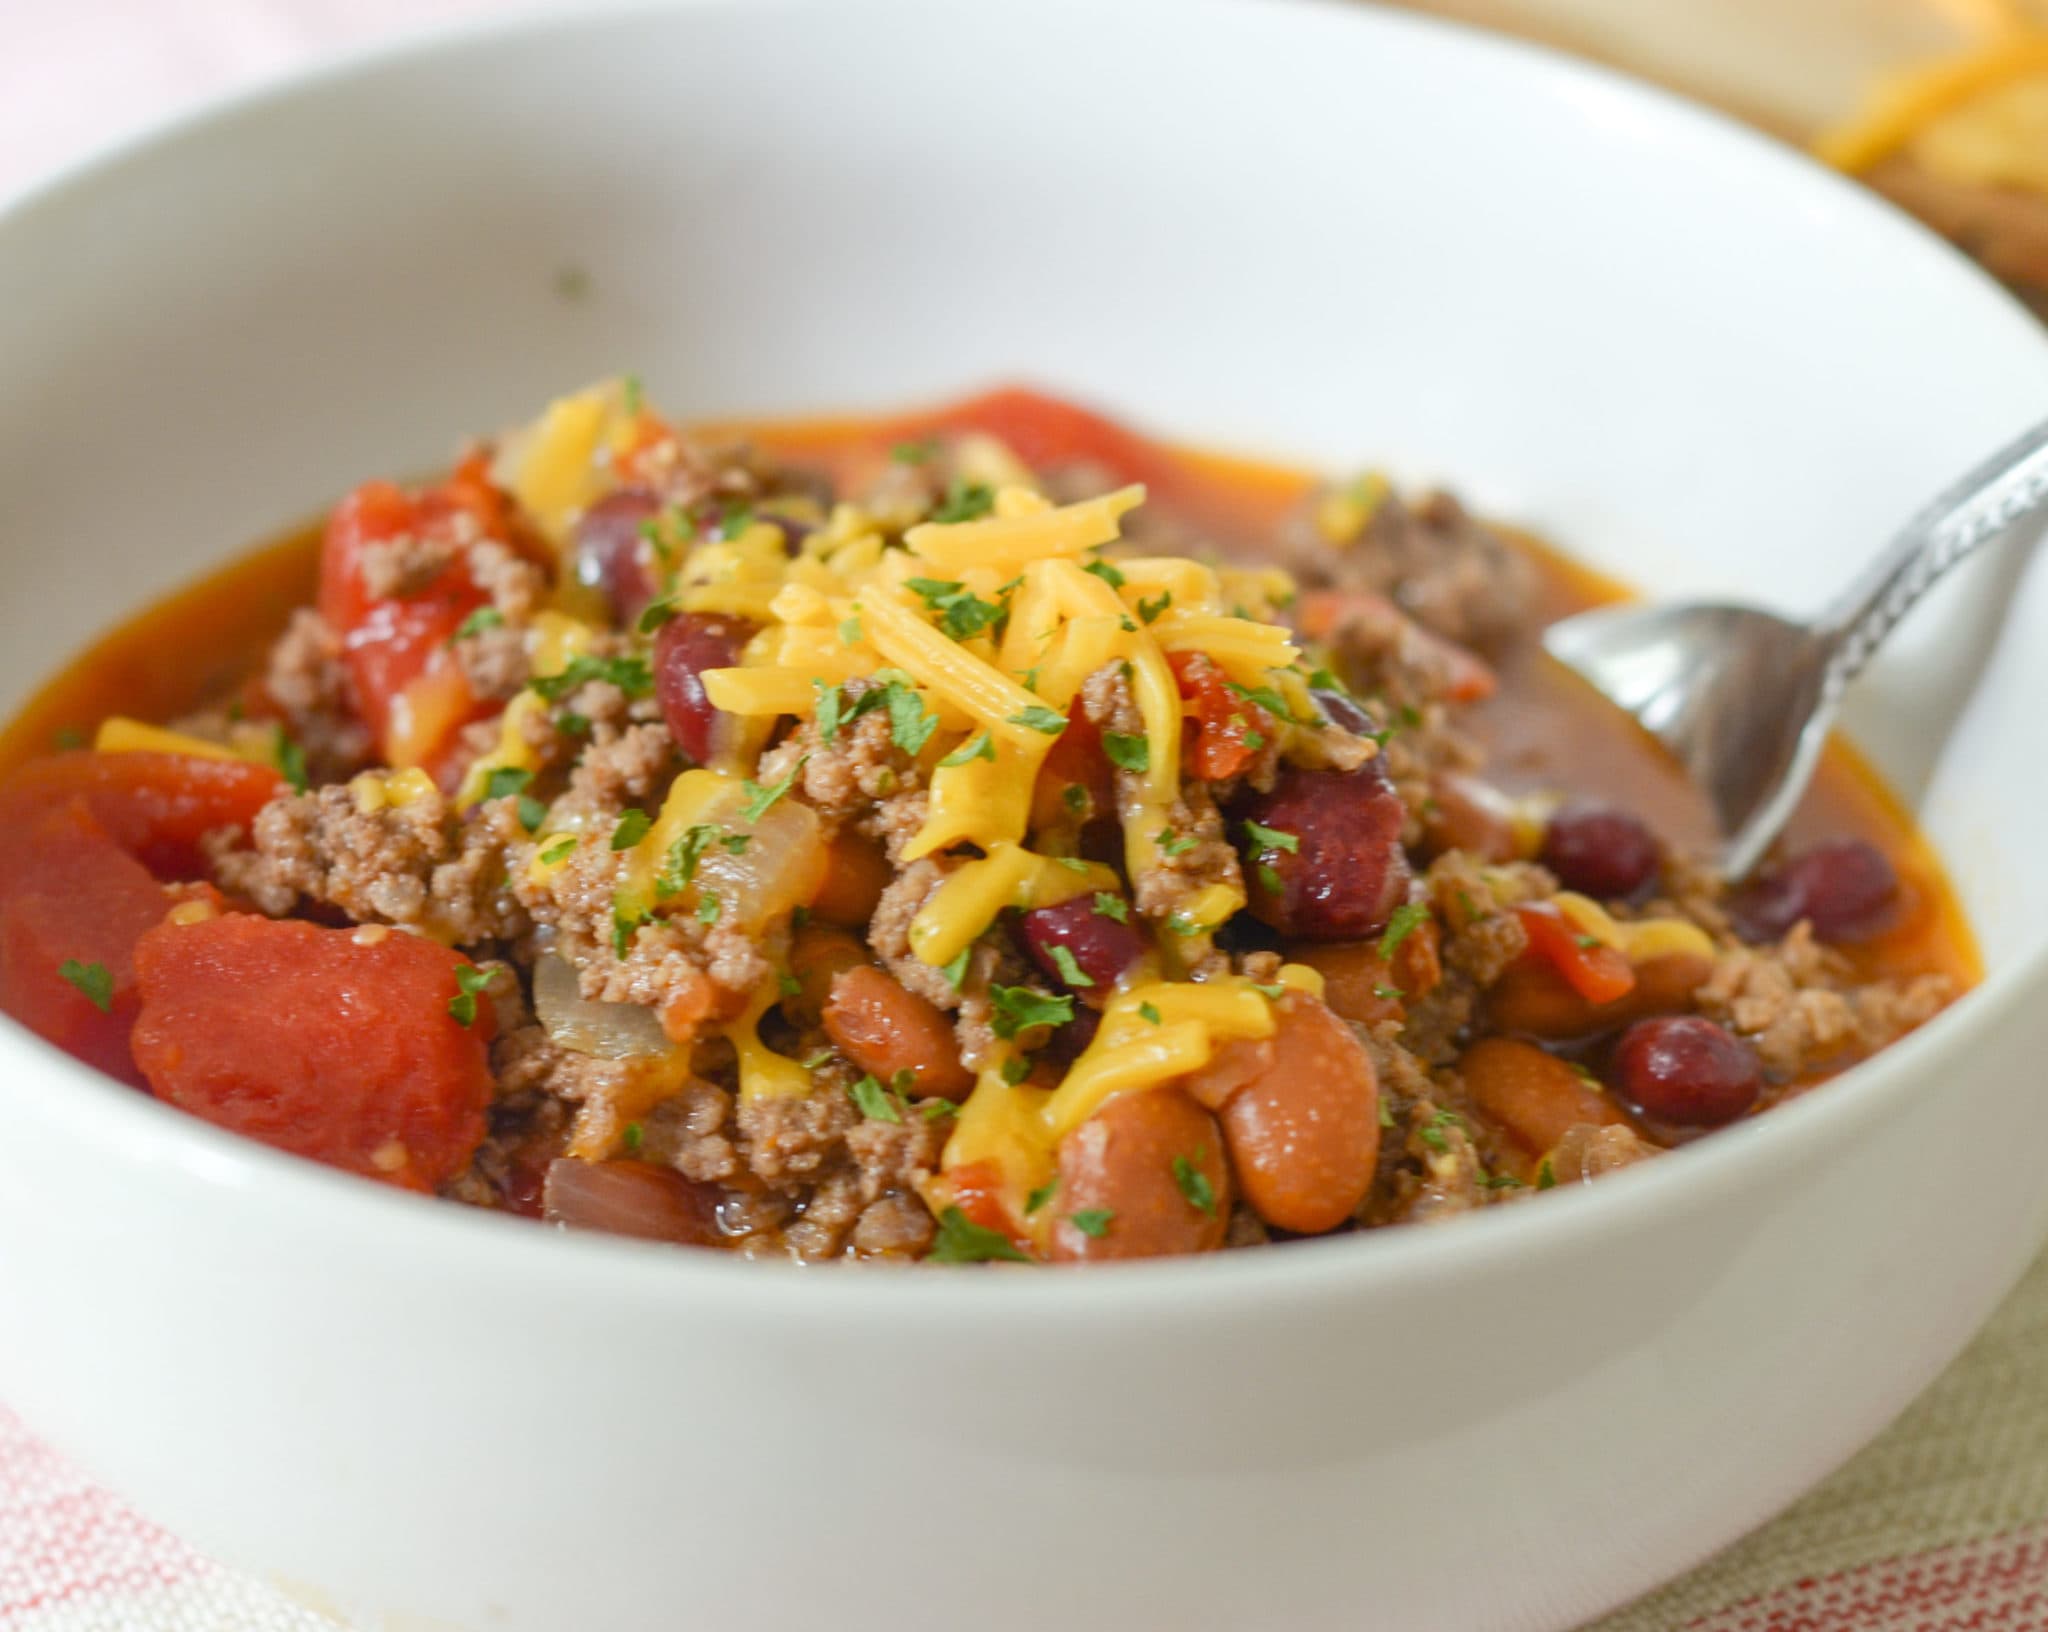 https://www.mommyhatescooking.com/wp-content/uploads/2018/09/instant-pot-hearty-beef-bean-chili-11-e1567790970790.jpg